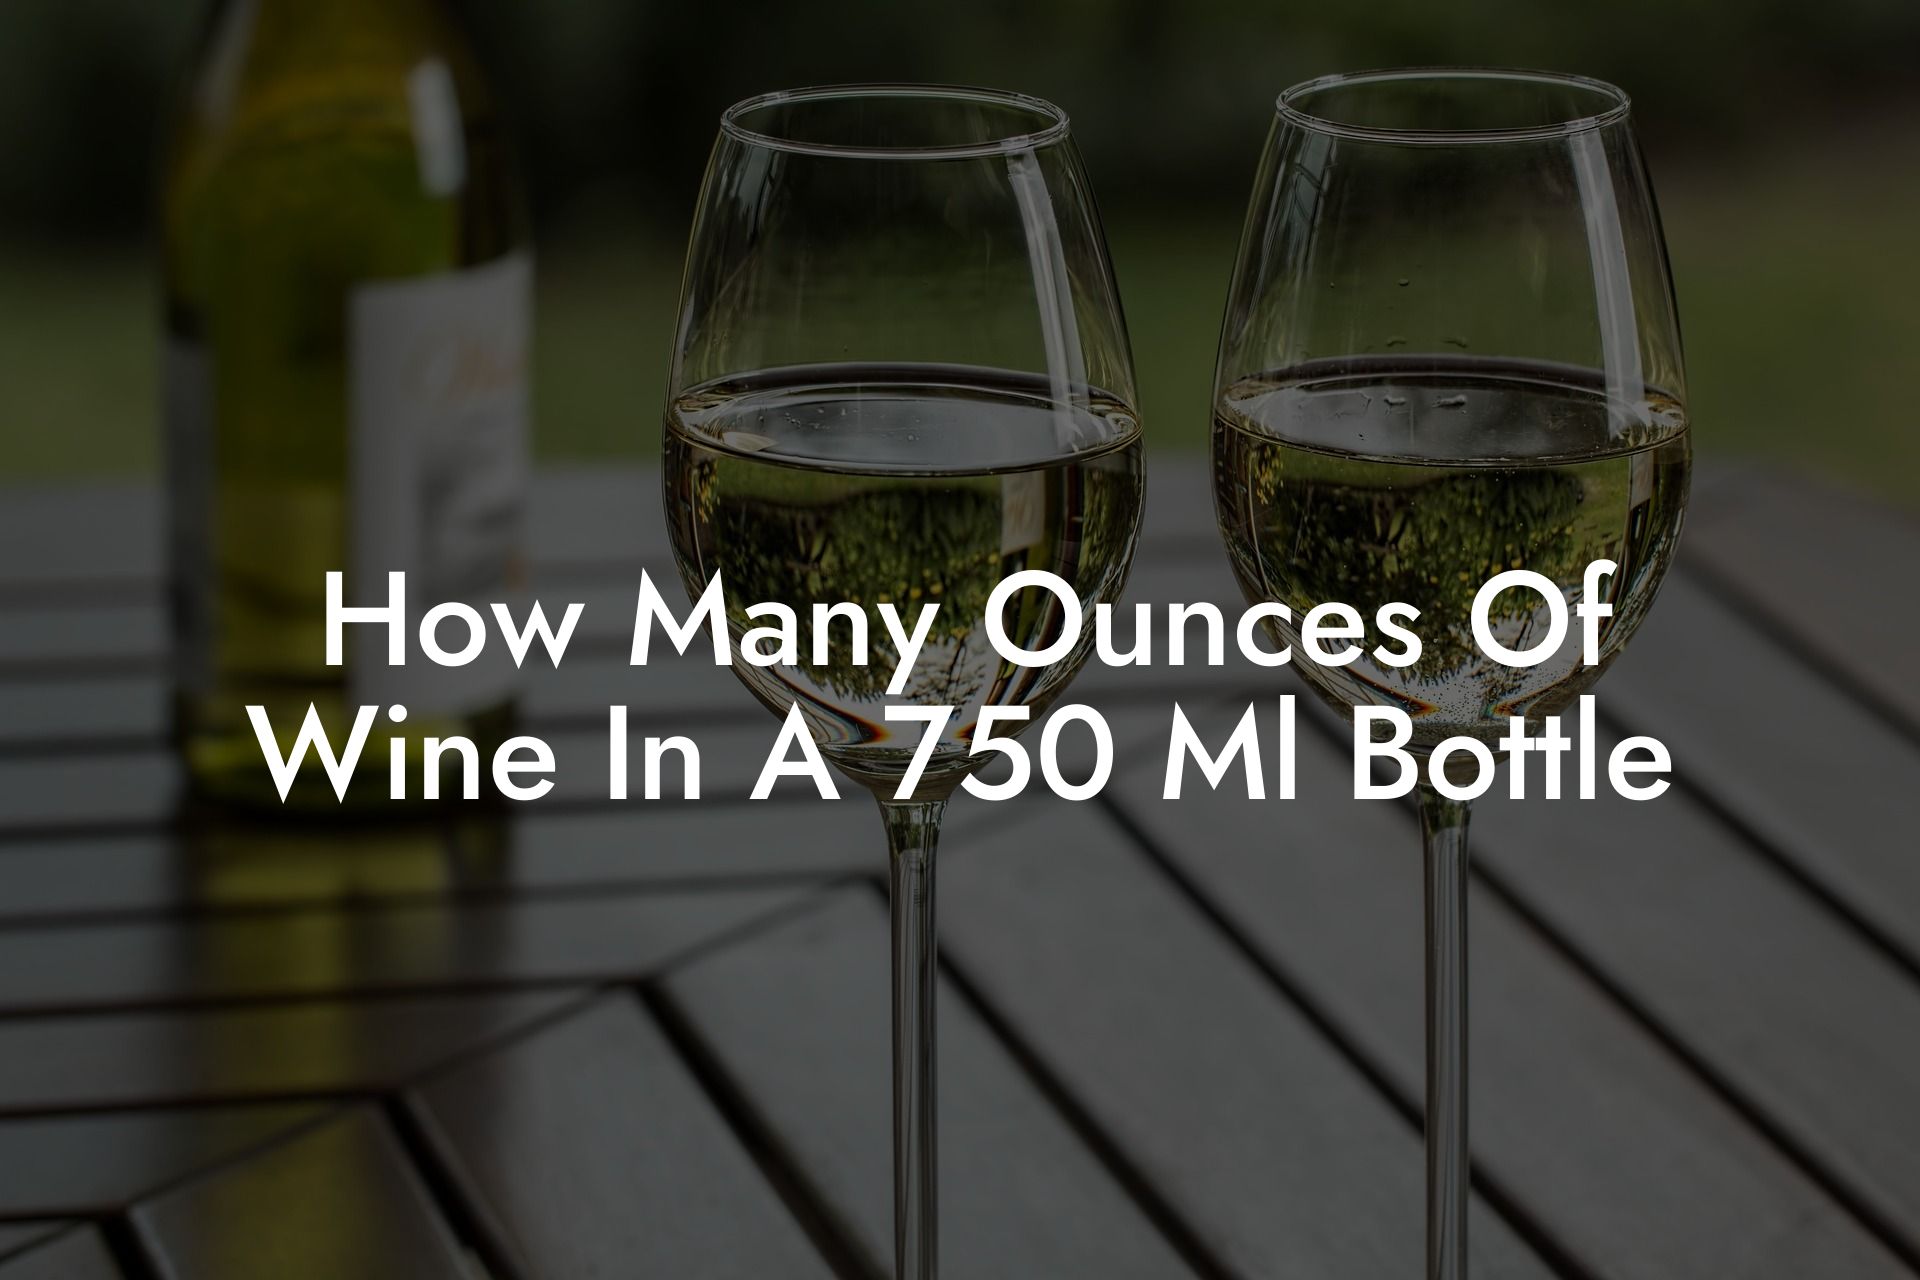 How Many Ounces Of Wine In A 750 Ml Bottle